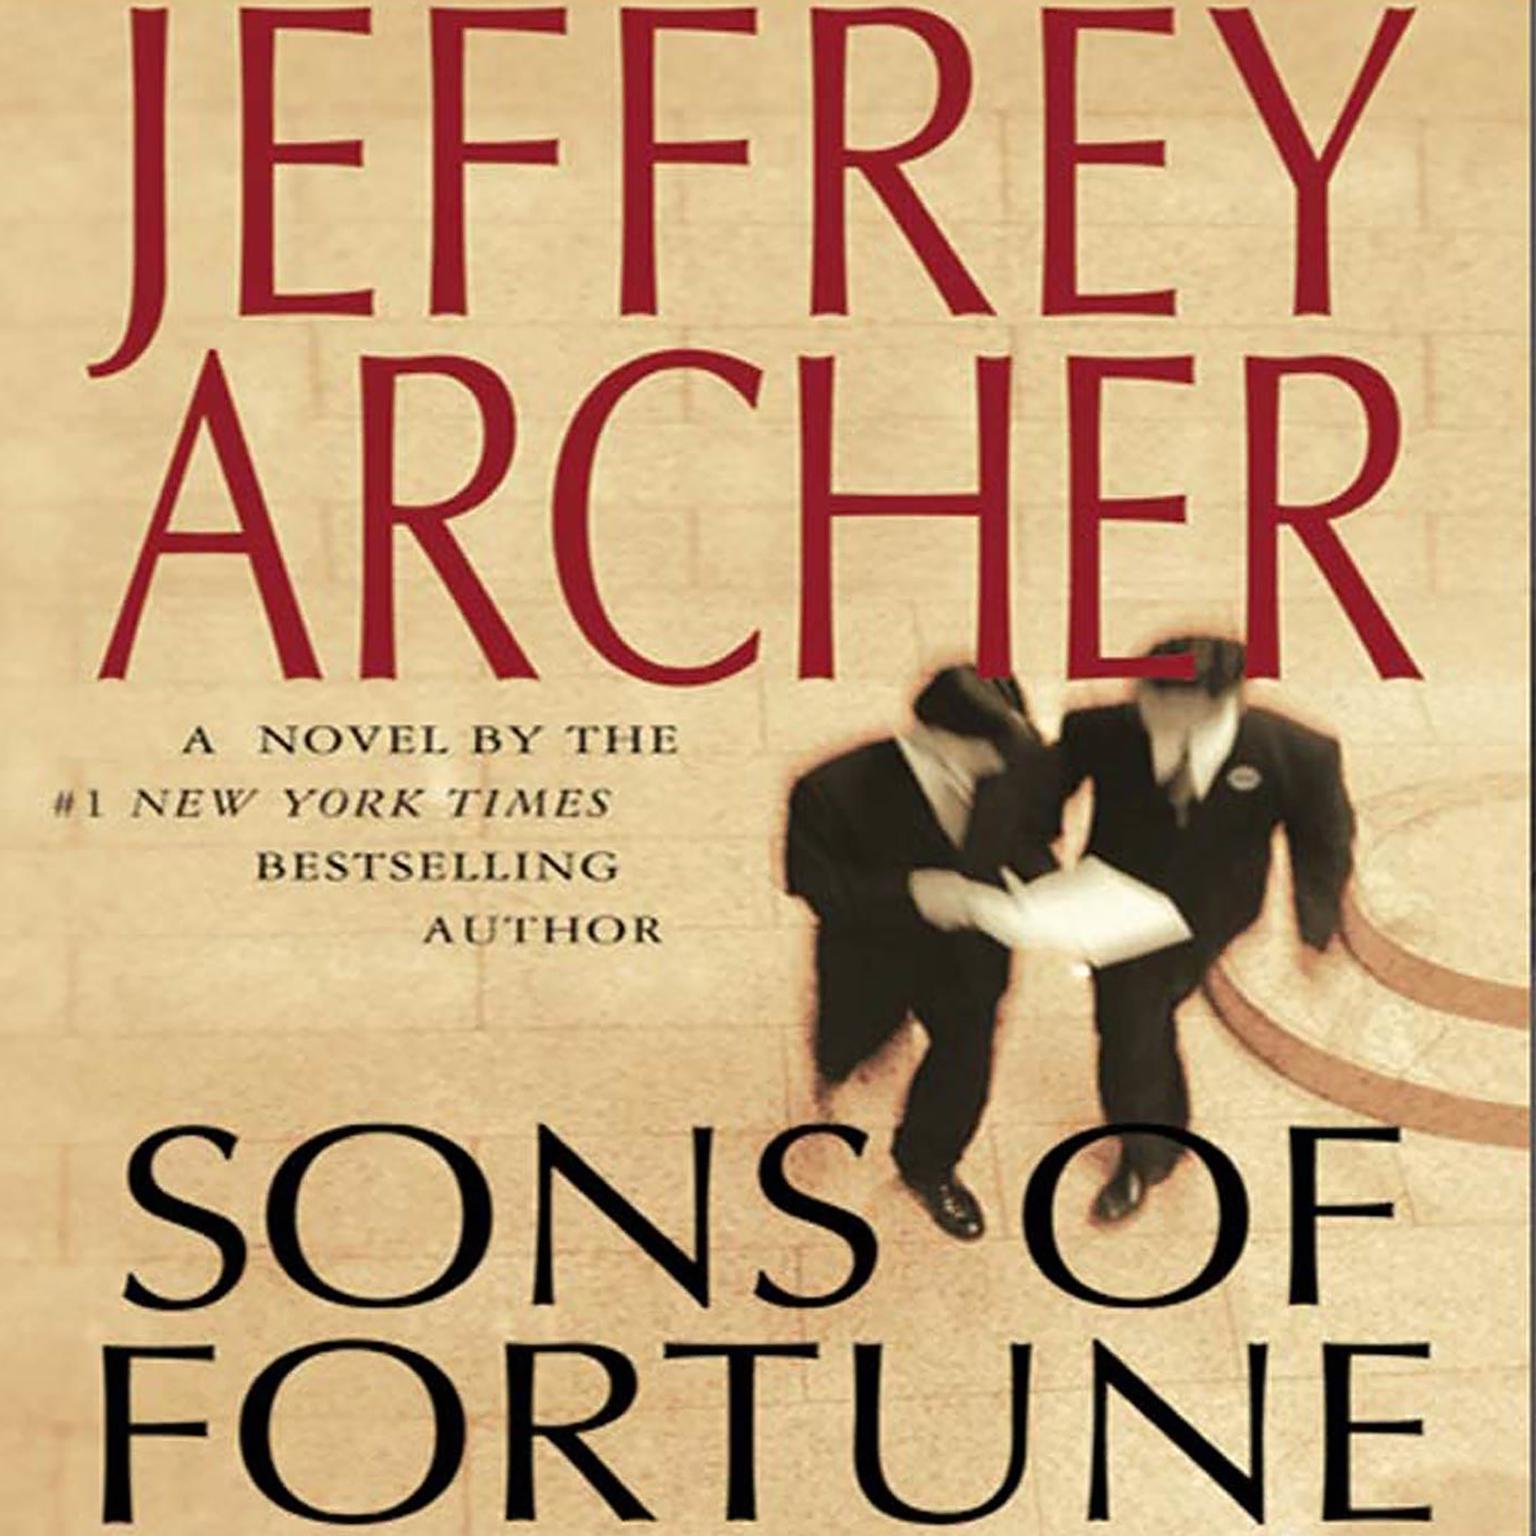 Sons of Fortune (Abridged) Audiobook, by Jeffrey Archer